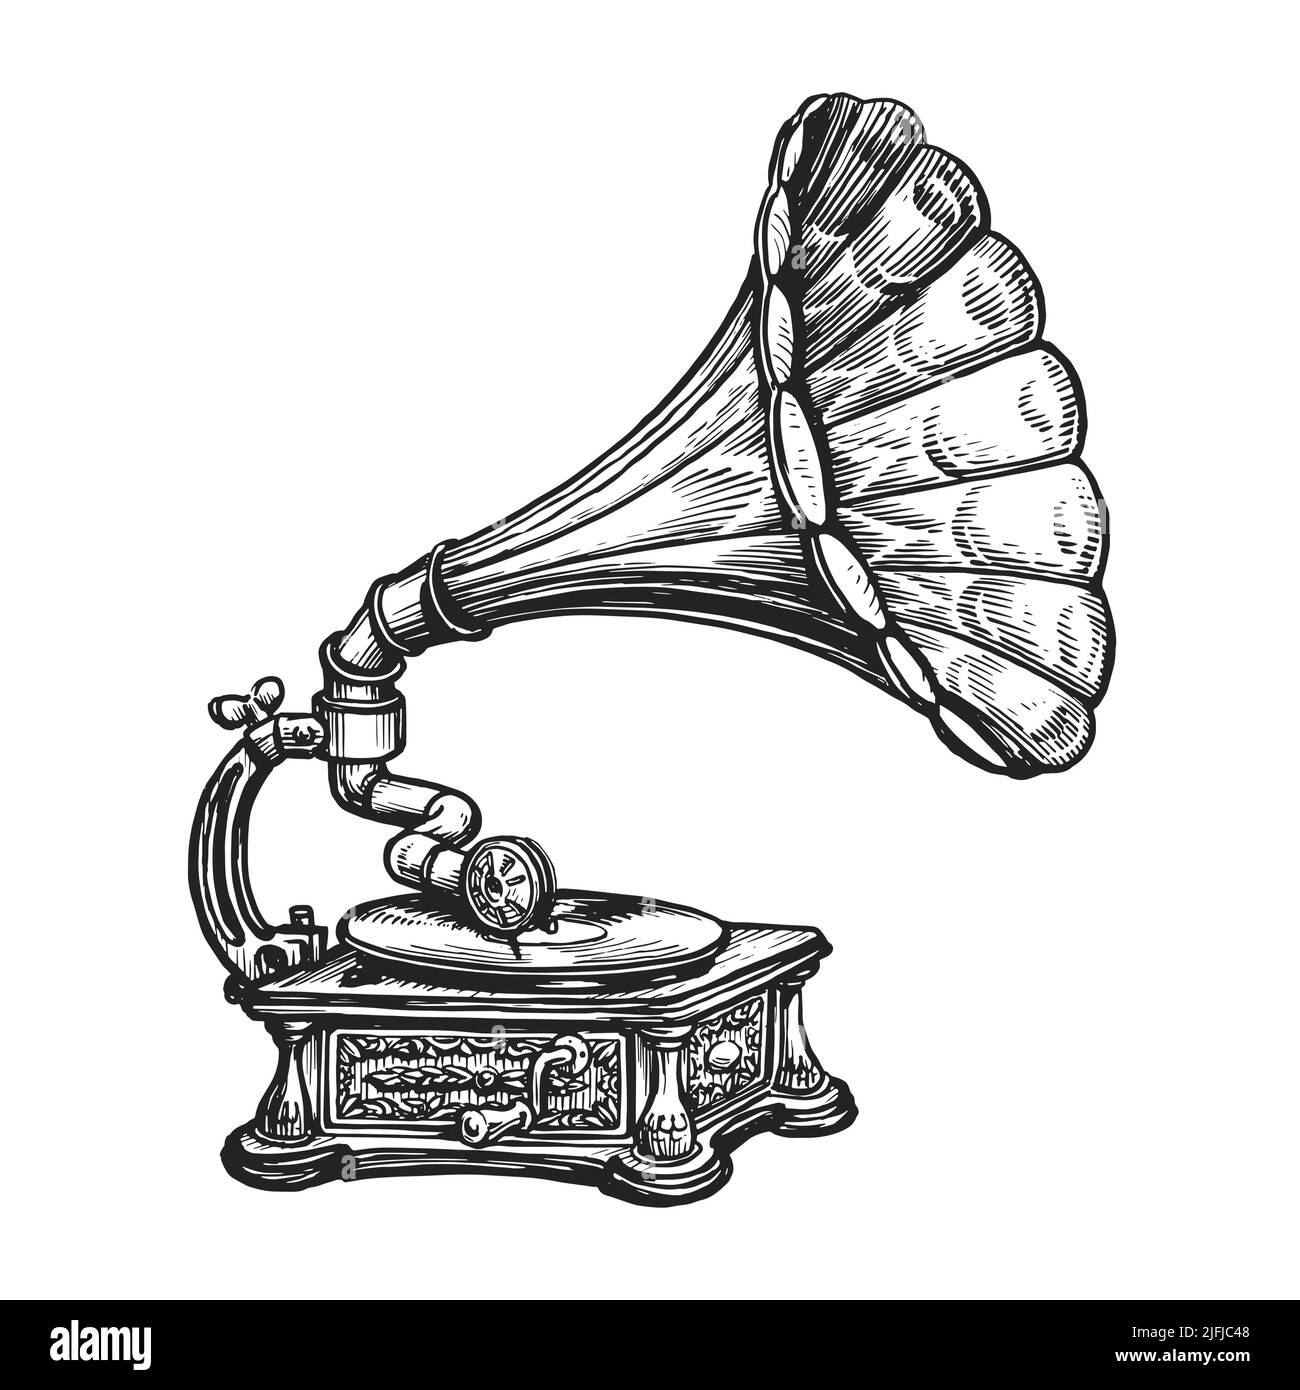 Old retro gramophone with vinyl record. Phonograph, vintage music player. Musical instrument drawn in engraving style Stock Vector